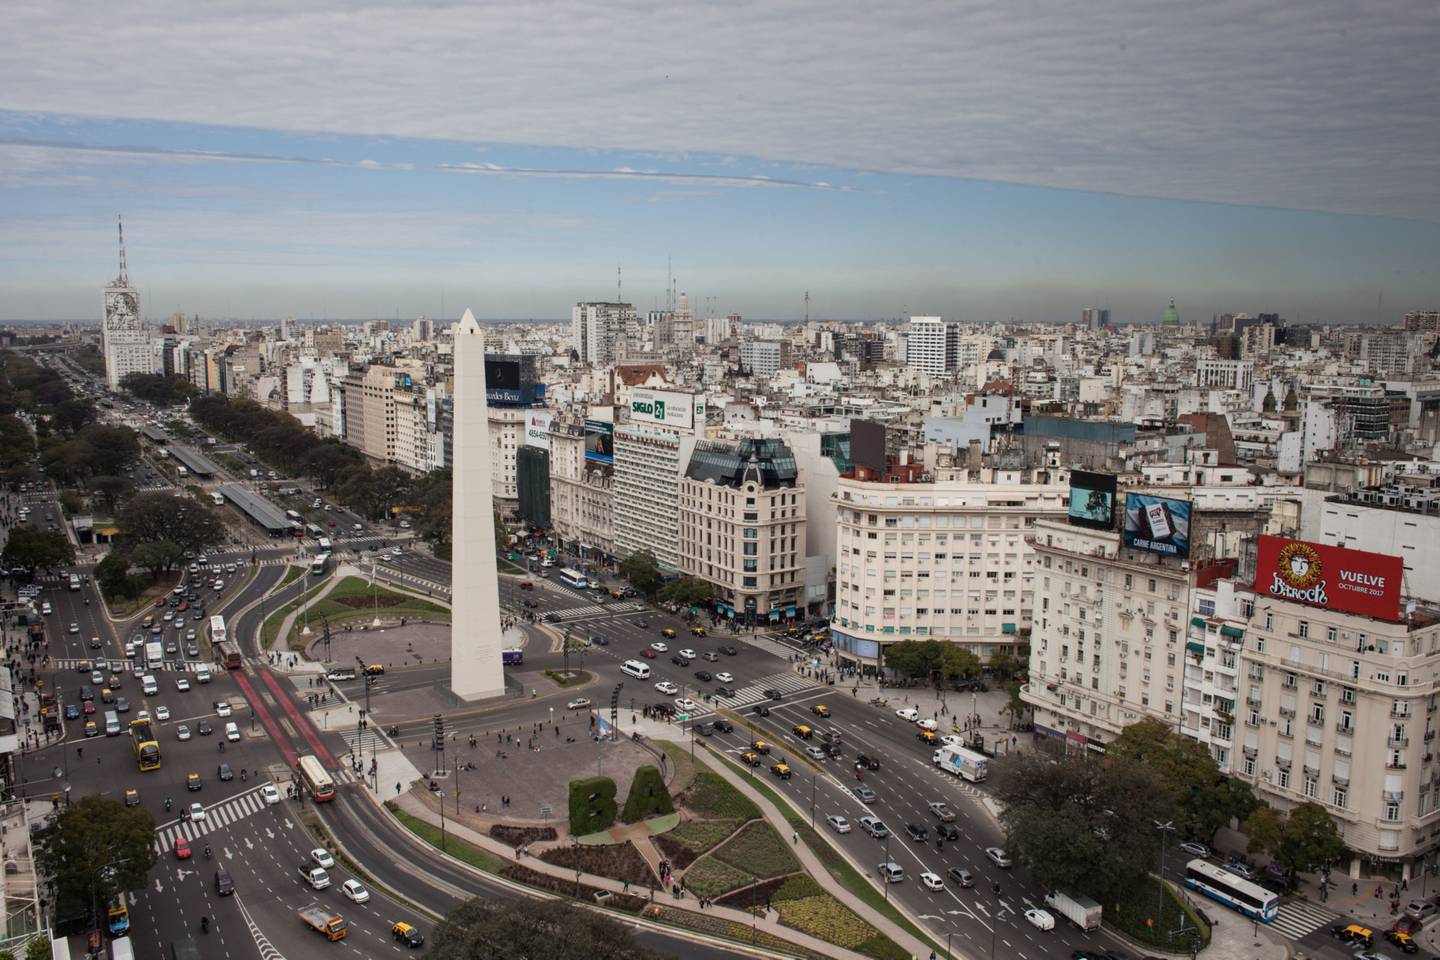 The Obelisco de Buenos Aires national monument stands in the Plaza de la Republica in Buenos Aires, Argentina, on Wednesday, Sept. 13, 2017. The National Institute of Statistics and Censuses is scheduled to release GDP figures on Sept. 21, 2017. Photographer: Erica Canepa/ Bloombergdfd